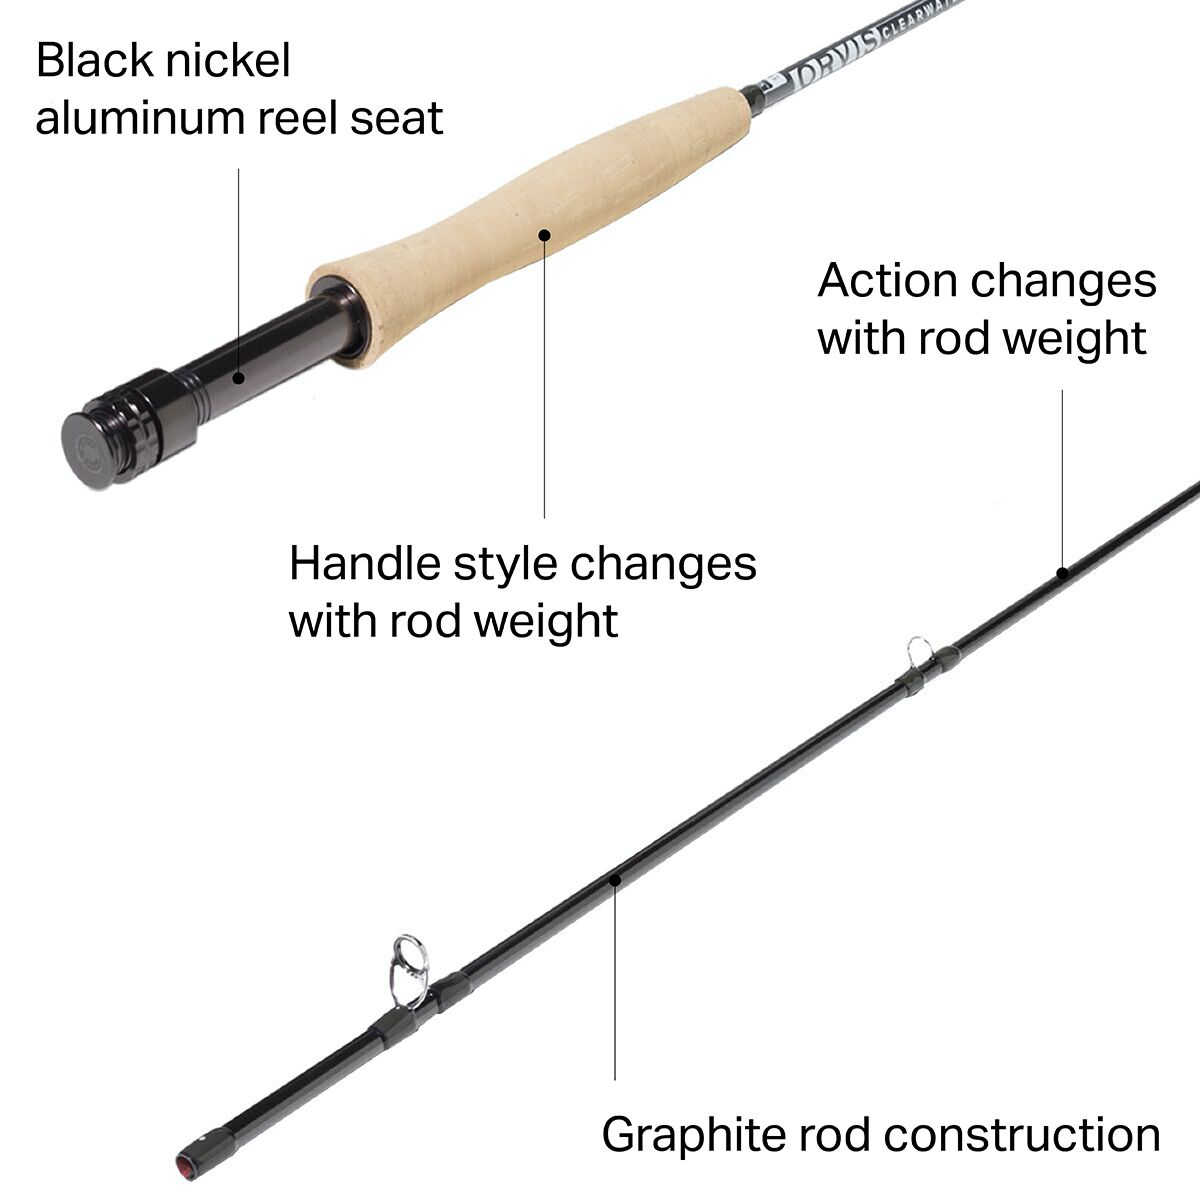 Orvis Clearwater Fly Rod - 4-Piece - Fishing